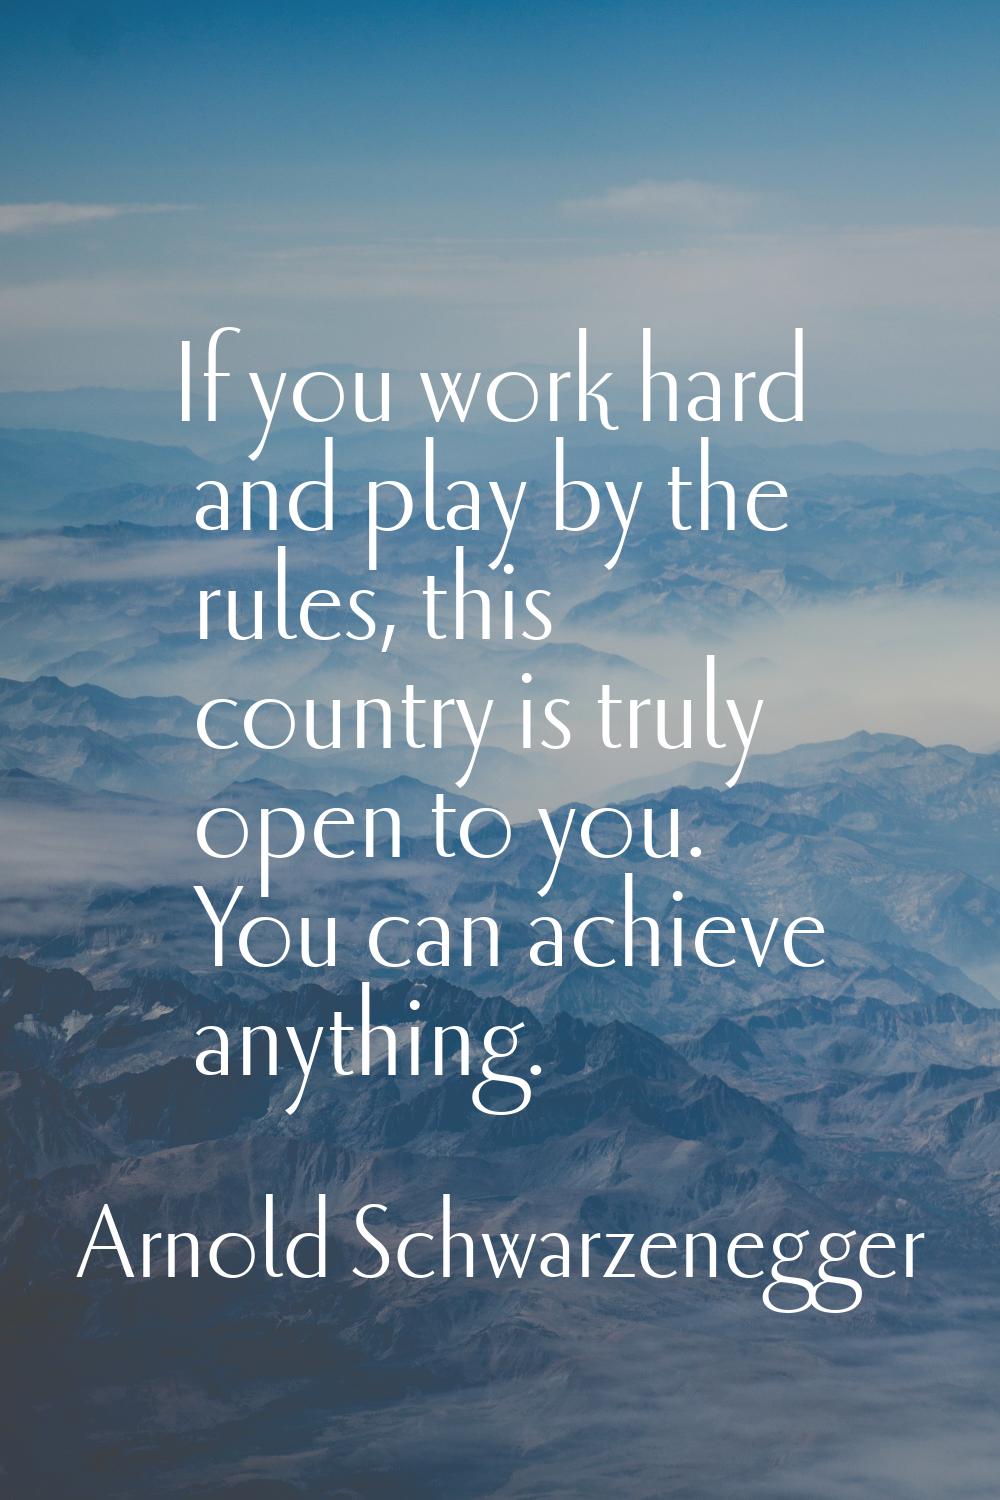 If you work hard and play by the rules, this country is truly open to you. You can achieve anything